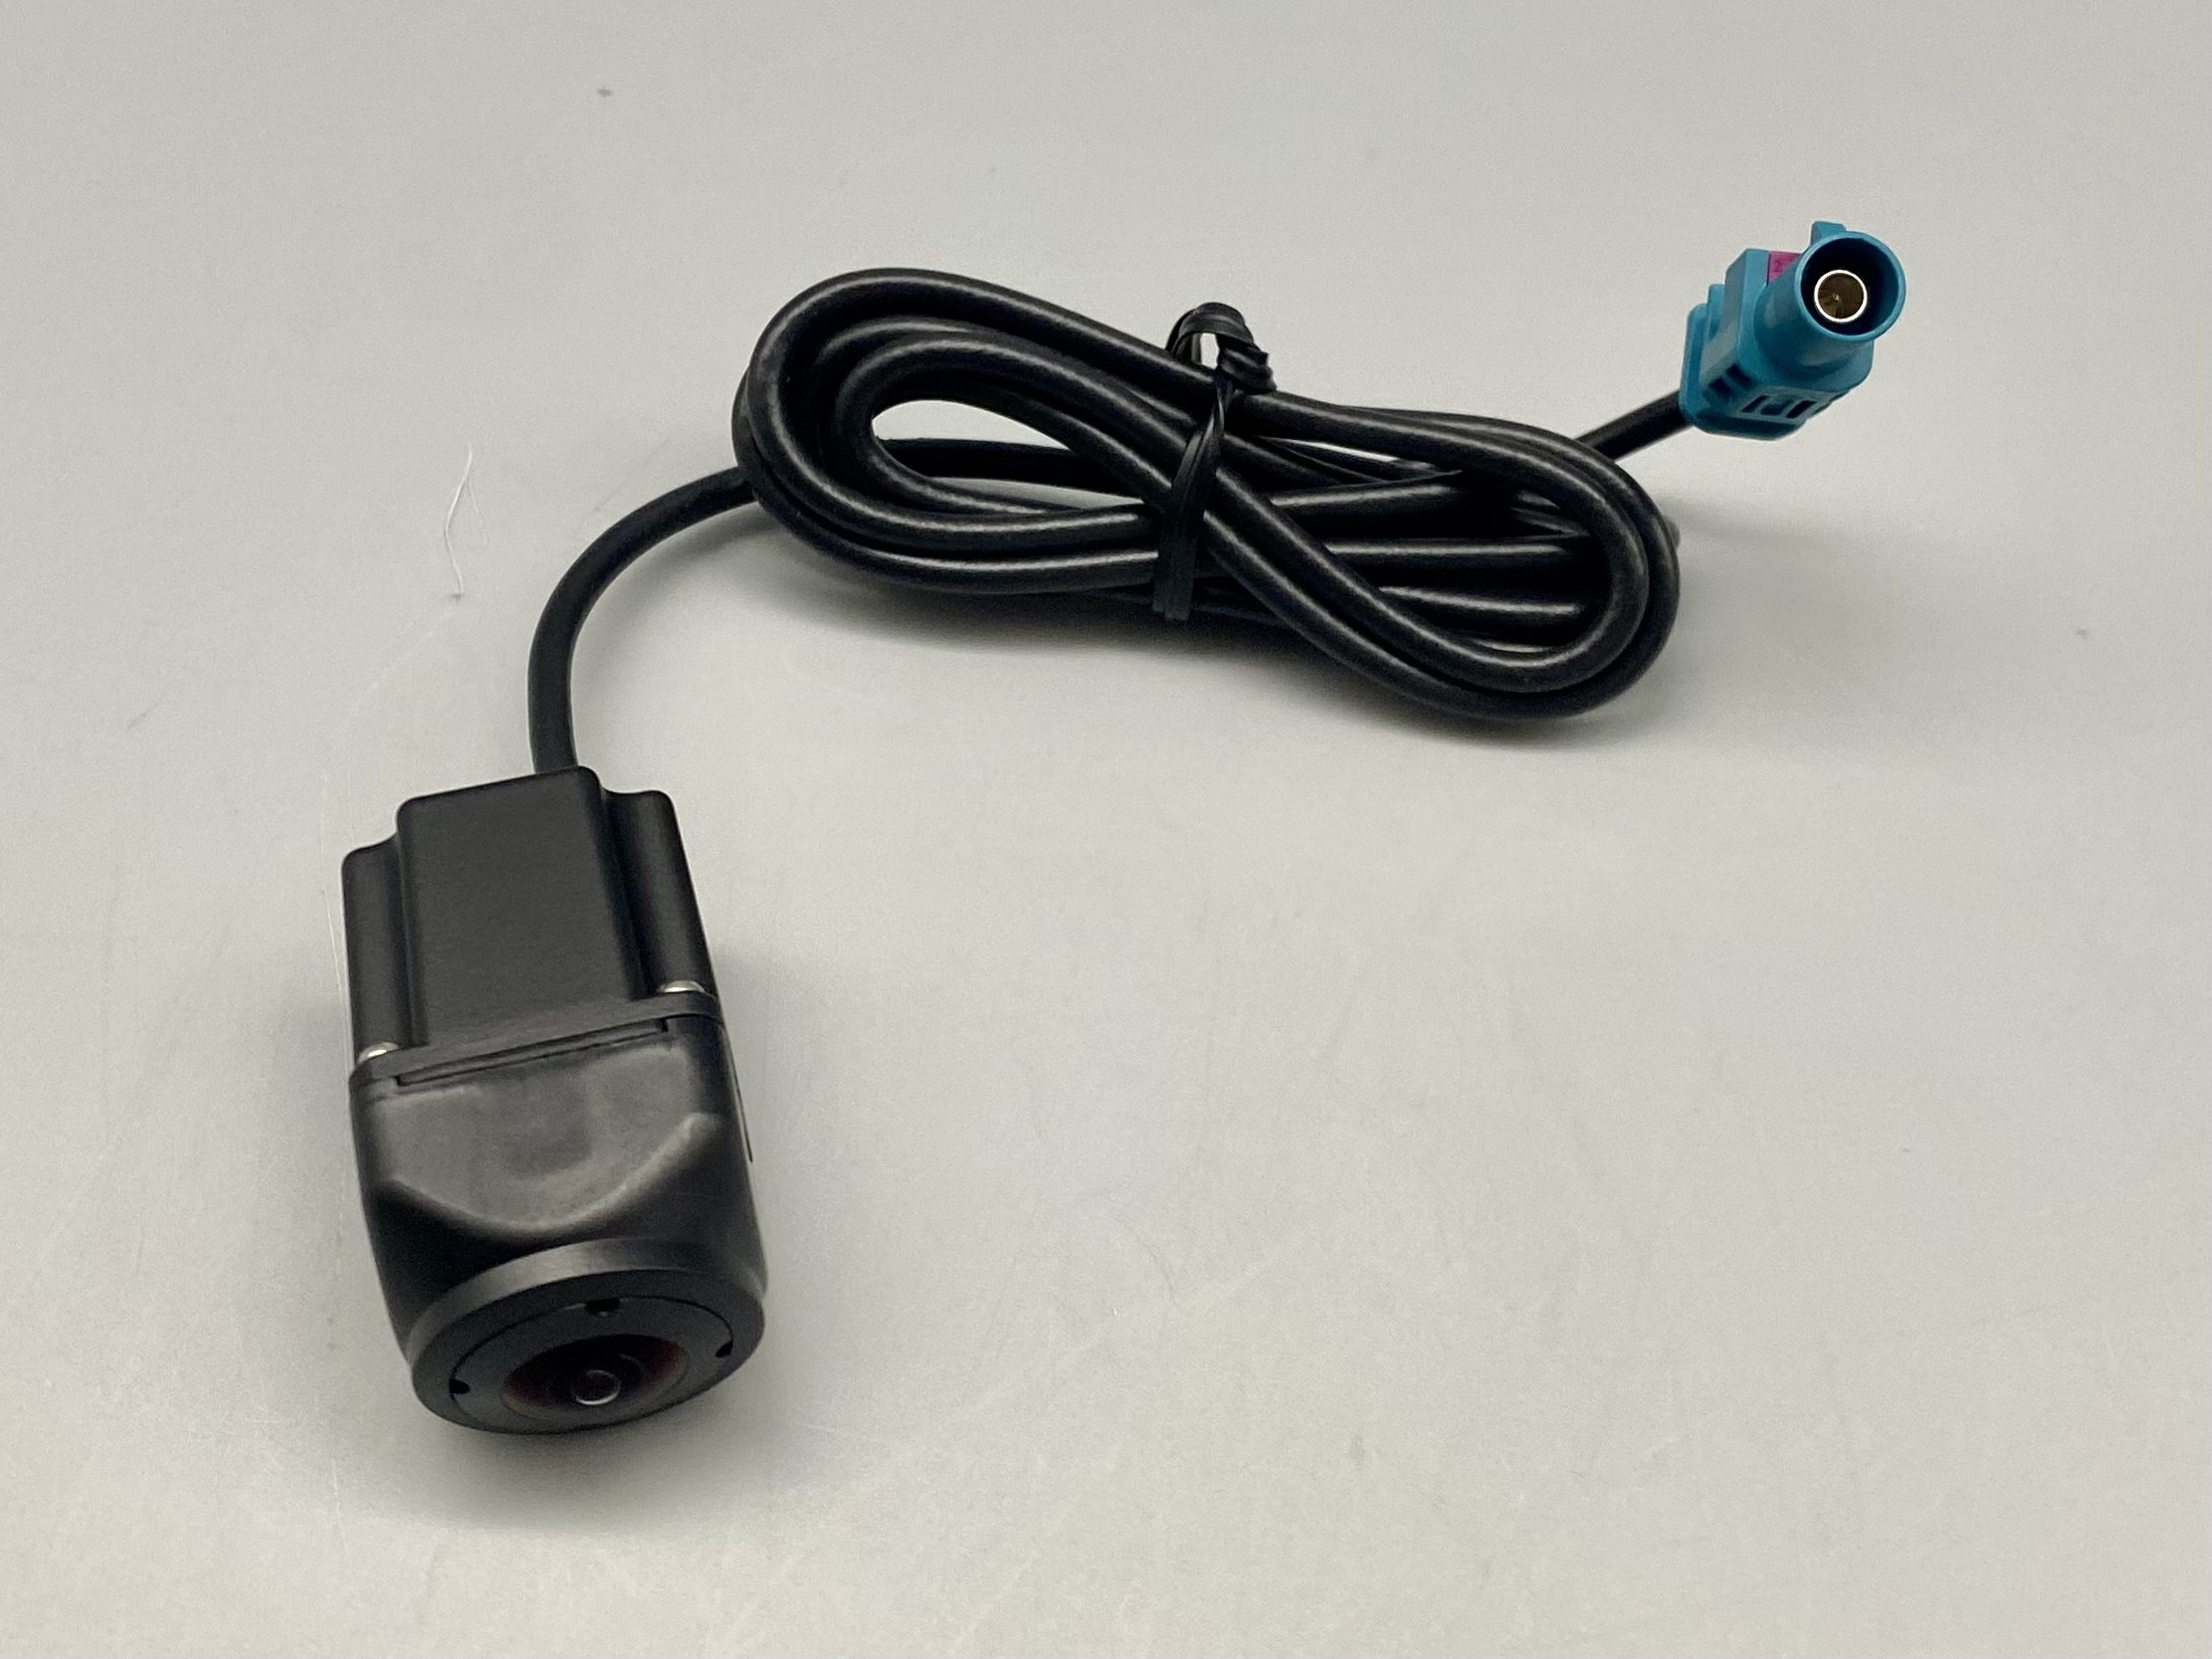 Xite Color Rear Camera with Blue coaxial-type connector.